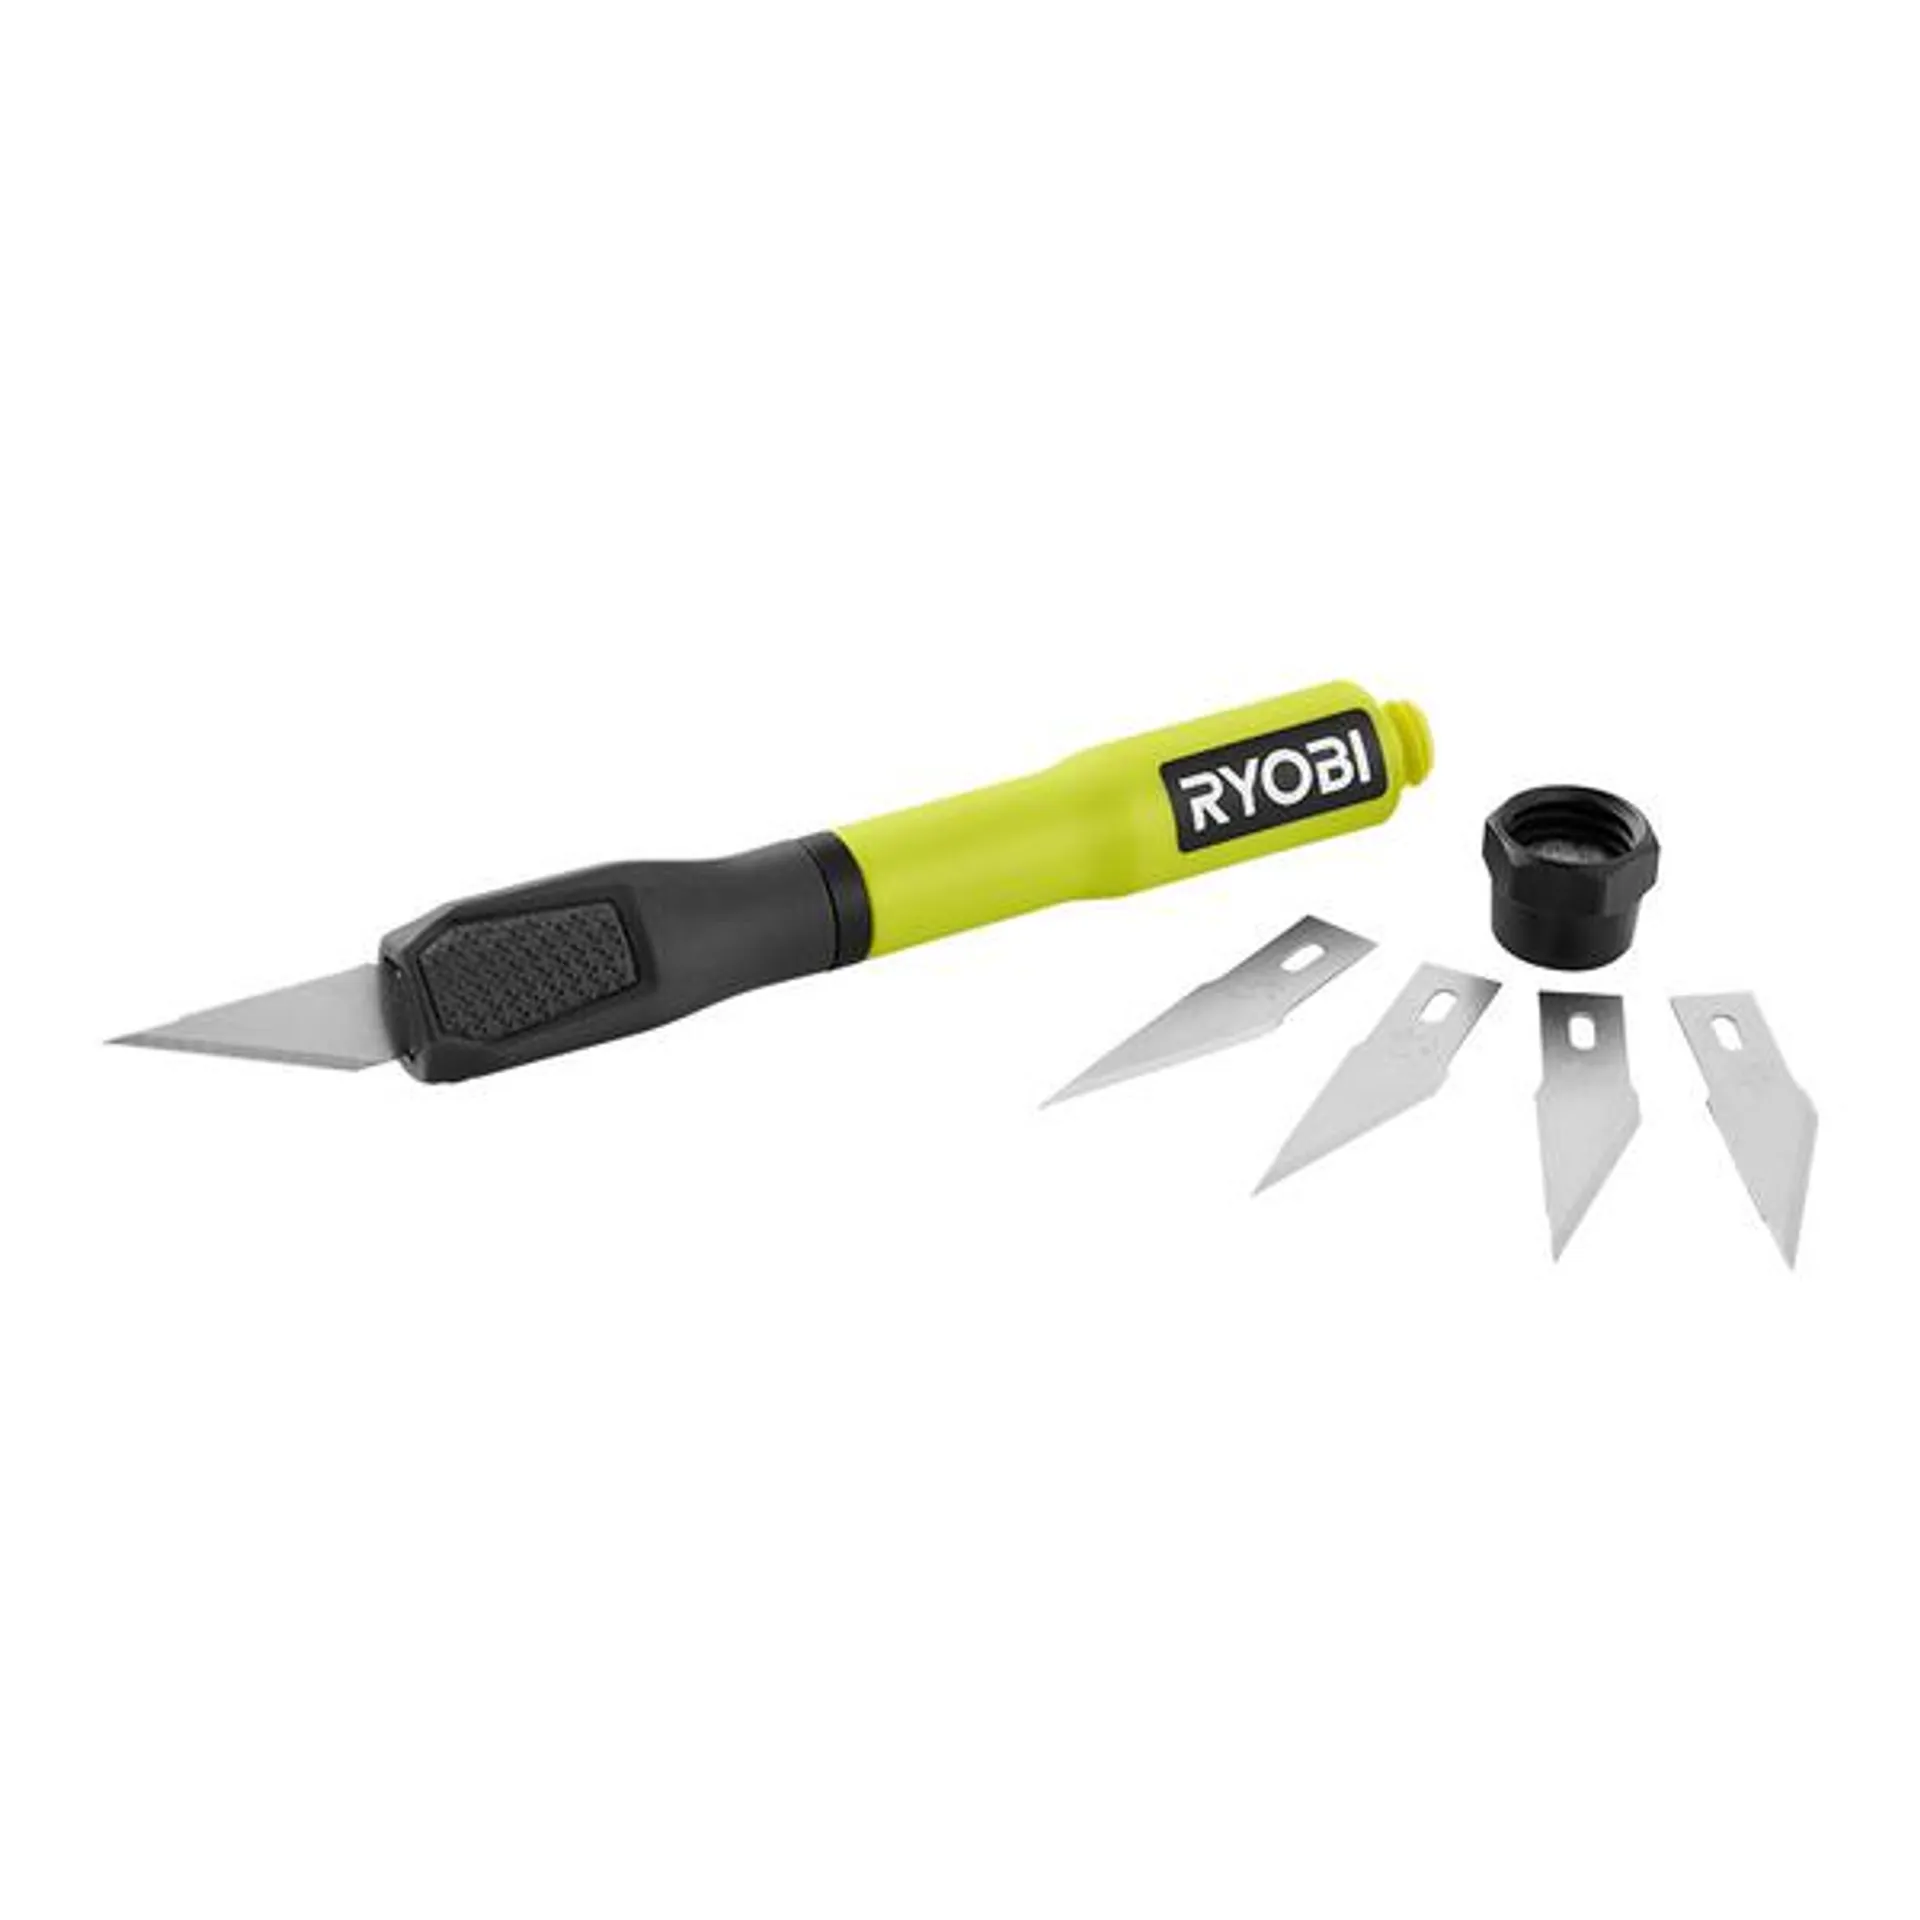 2-IN-1 HOBBY KNIFE WITH BLADE STORAGE